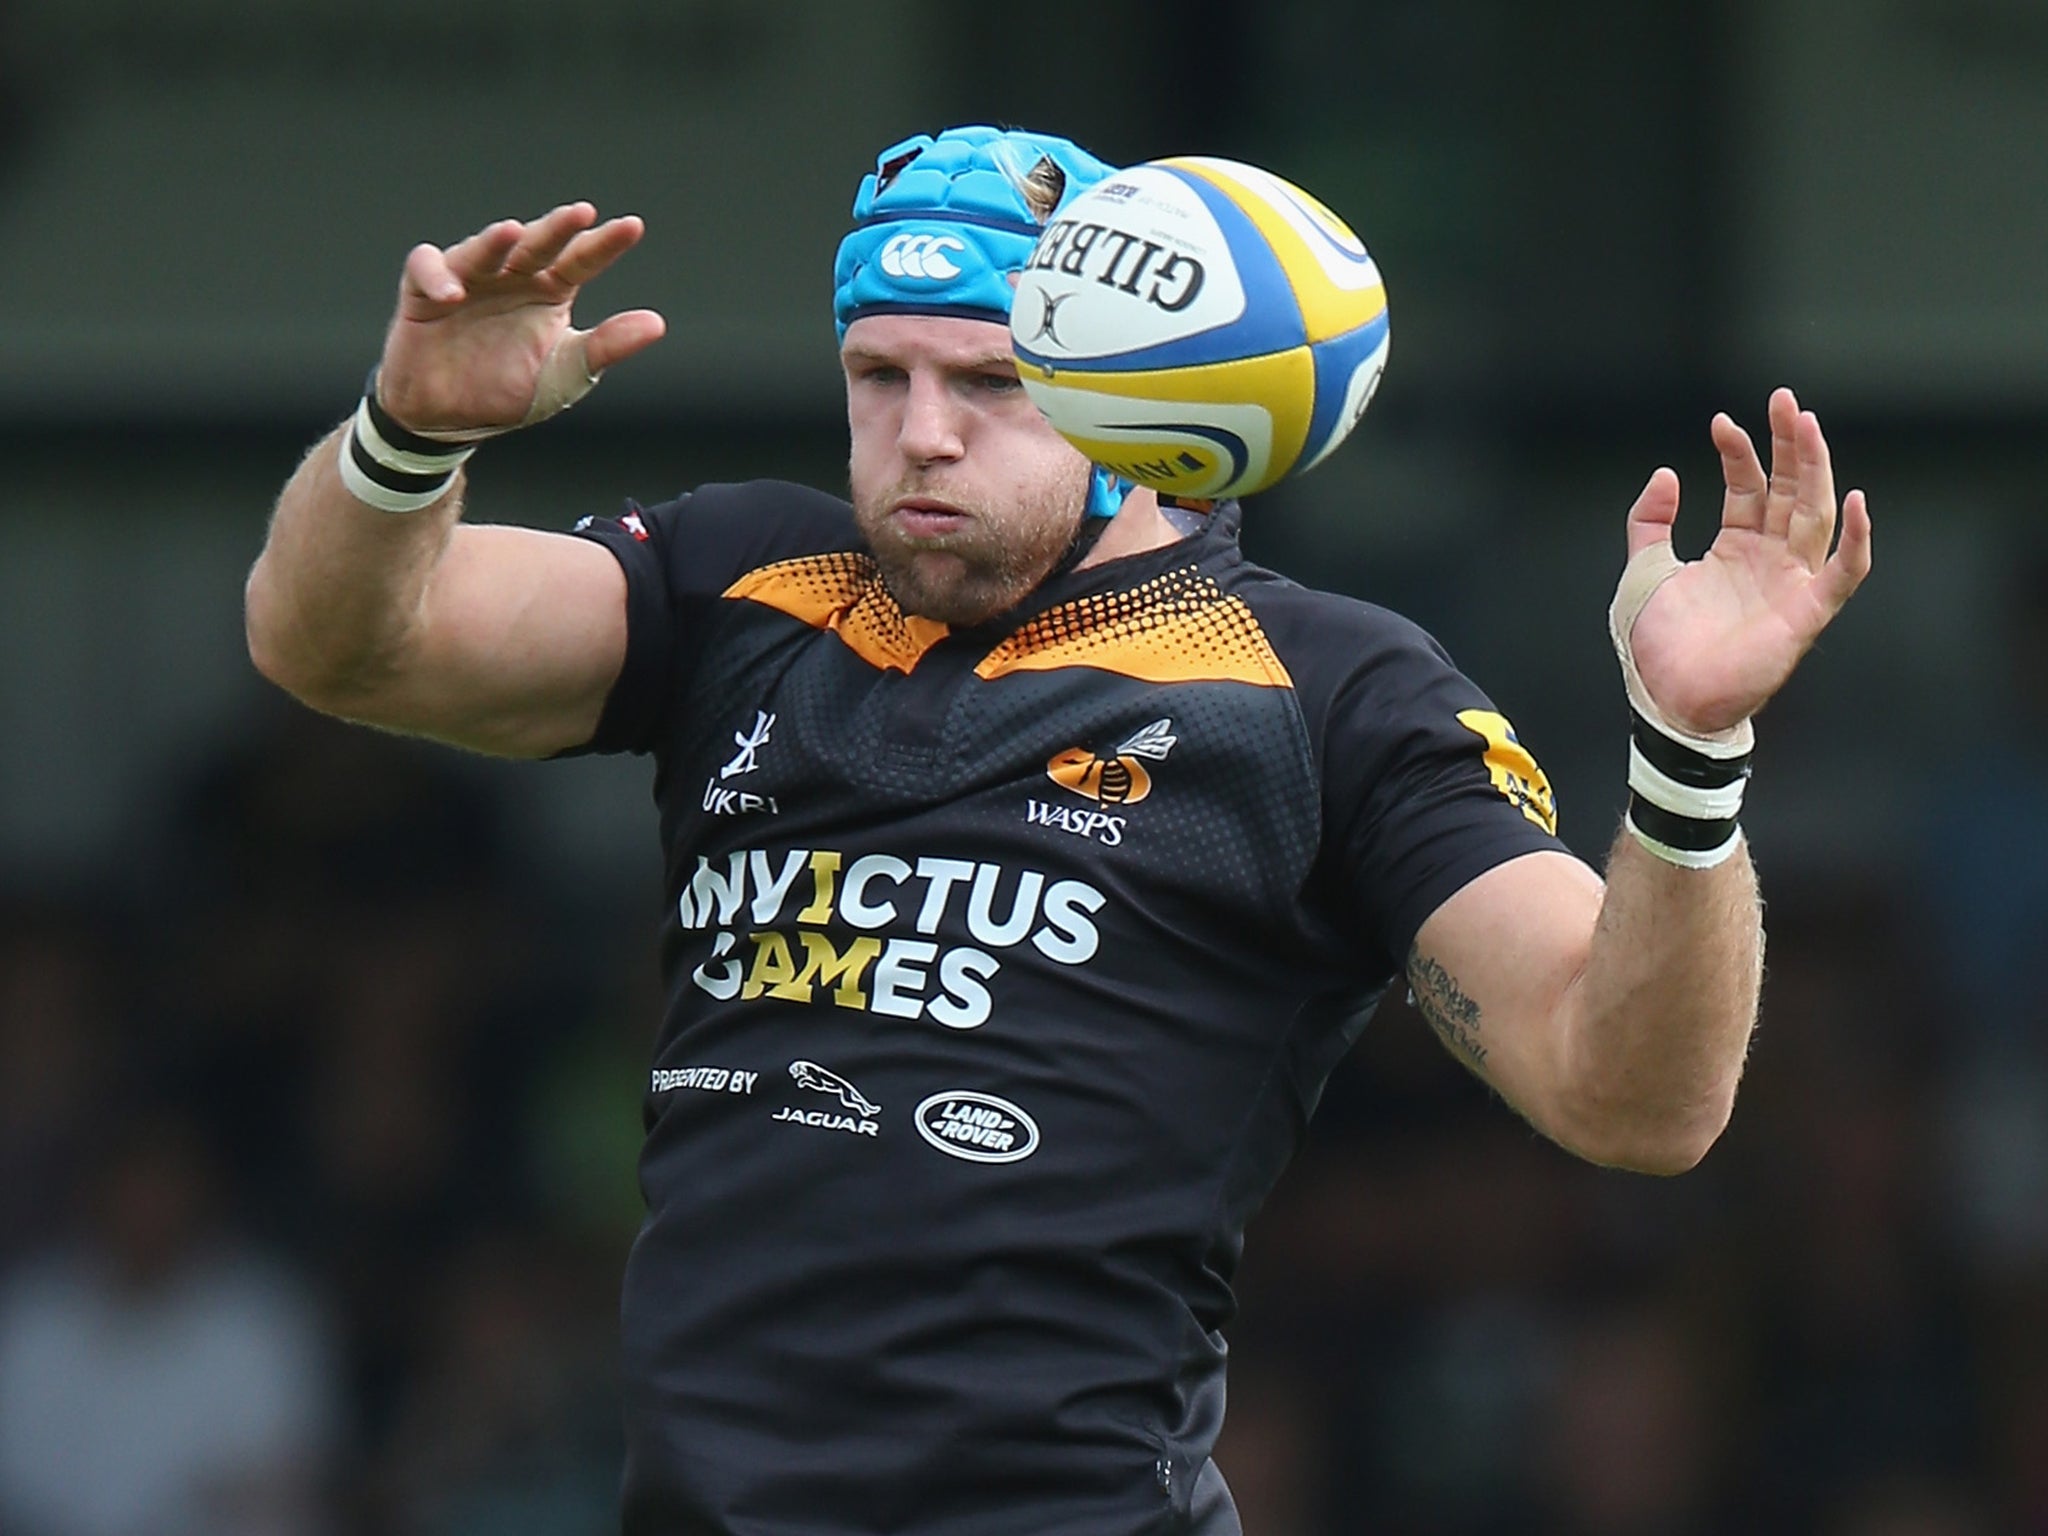 Wasps captain James Haskell wants to put in a big display ahead of the Six Nations